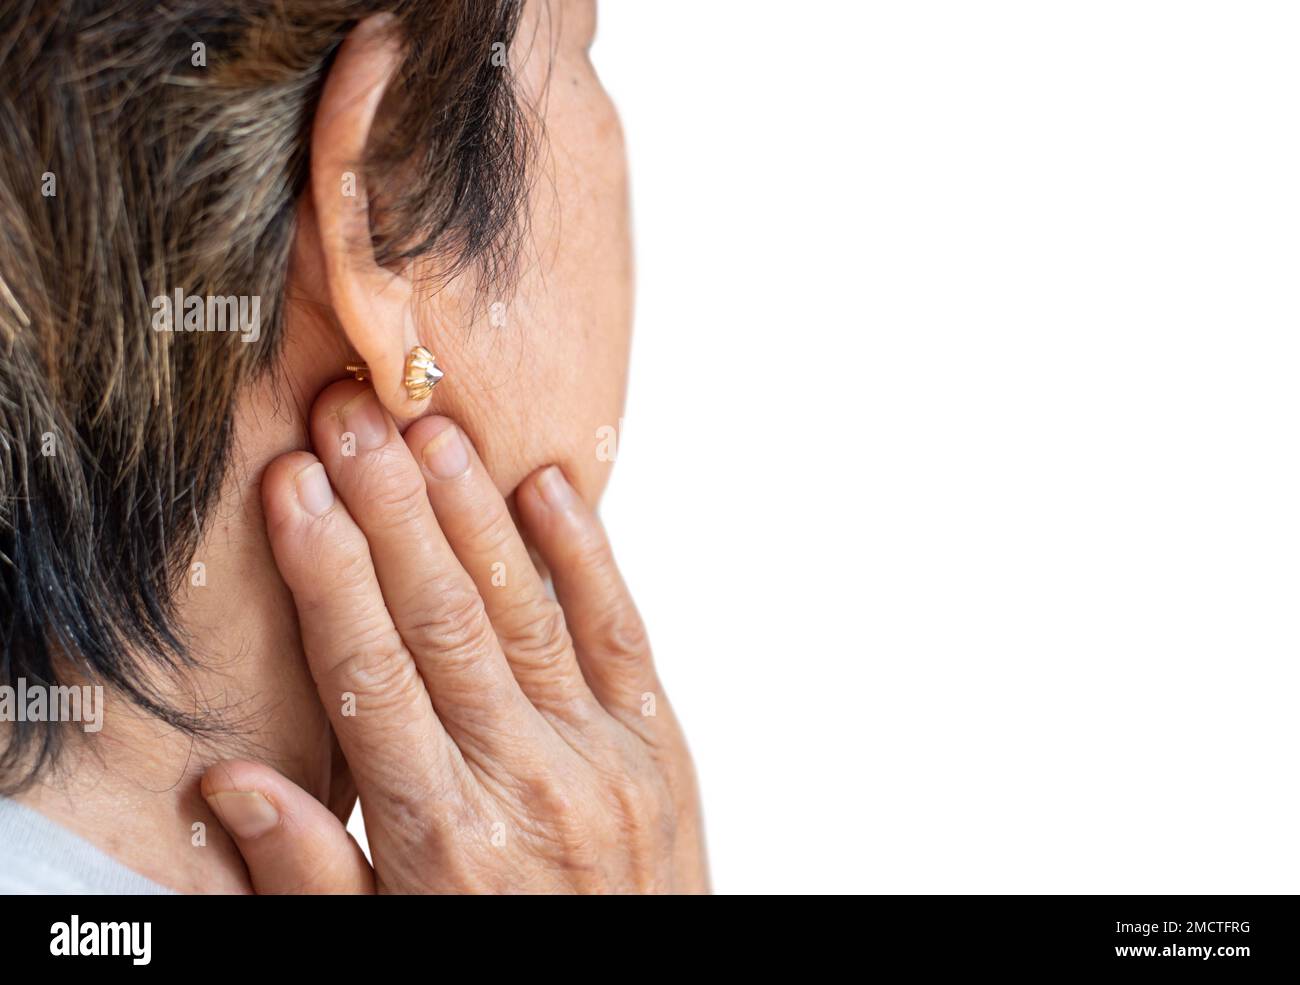 Pain behind the ear of Asian female patient. She feels earache and lymph node pain. Stock Photo